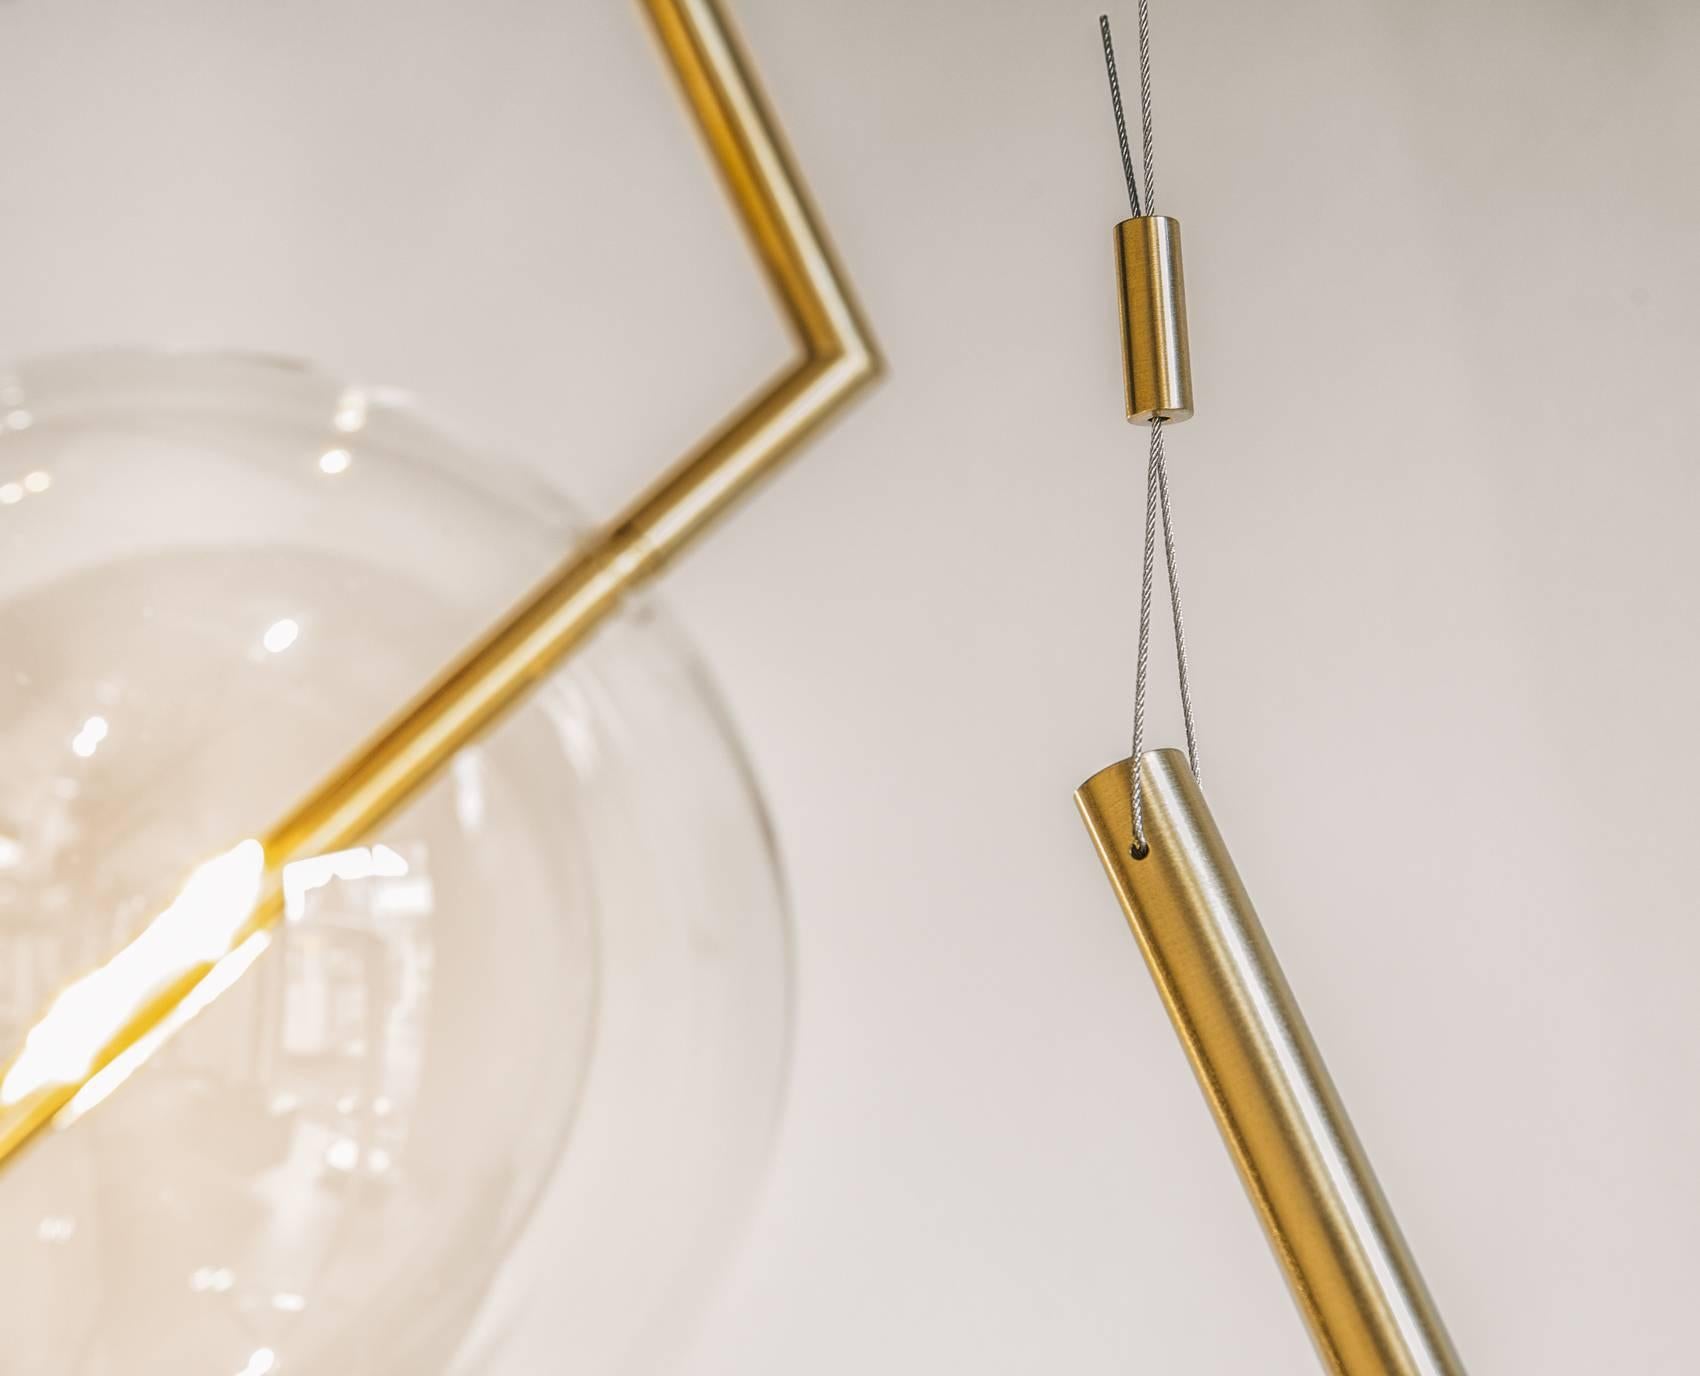 Somewhere between a Suspension Light and a Floor Lamp, Fulmine (thunderbolt) engages with gravity in an innovative and playful way. The Central Form, stretched from each end, seems to resist its own, emerging, Lightning-Bolt zig-zag Form, creating